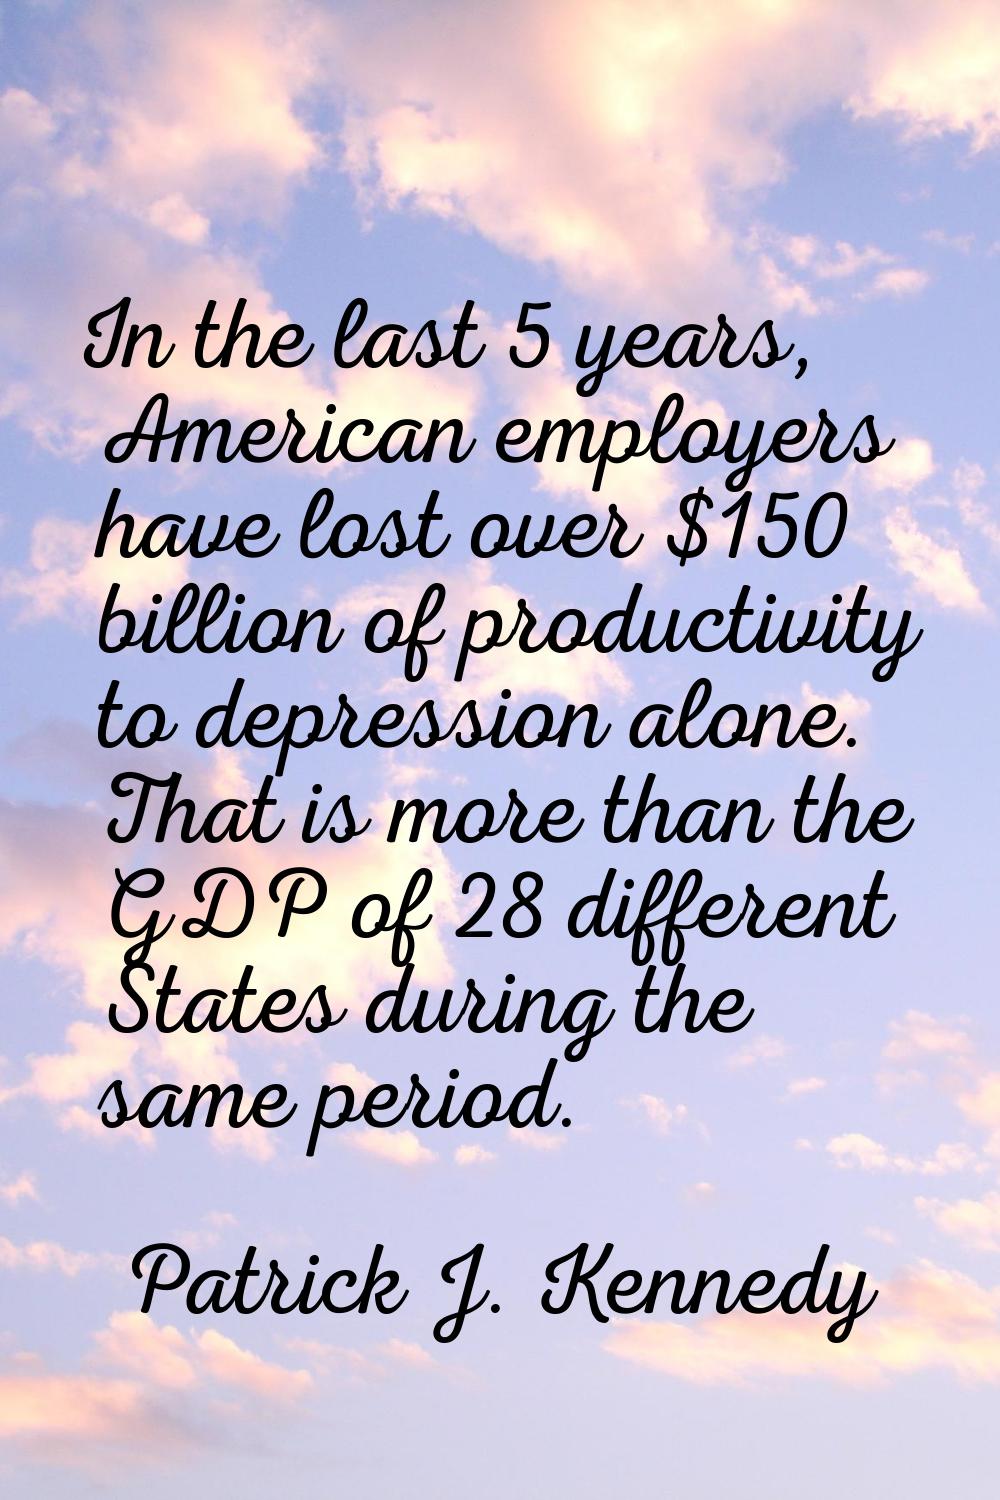 In the last 5 years, American employers have lost over $150 billion of productivity to depression a